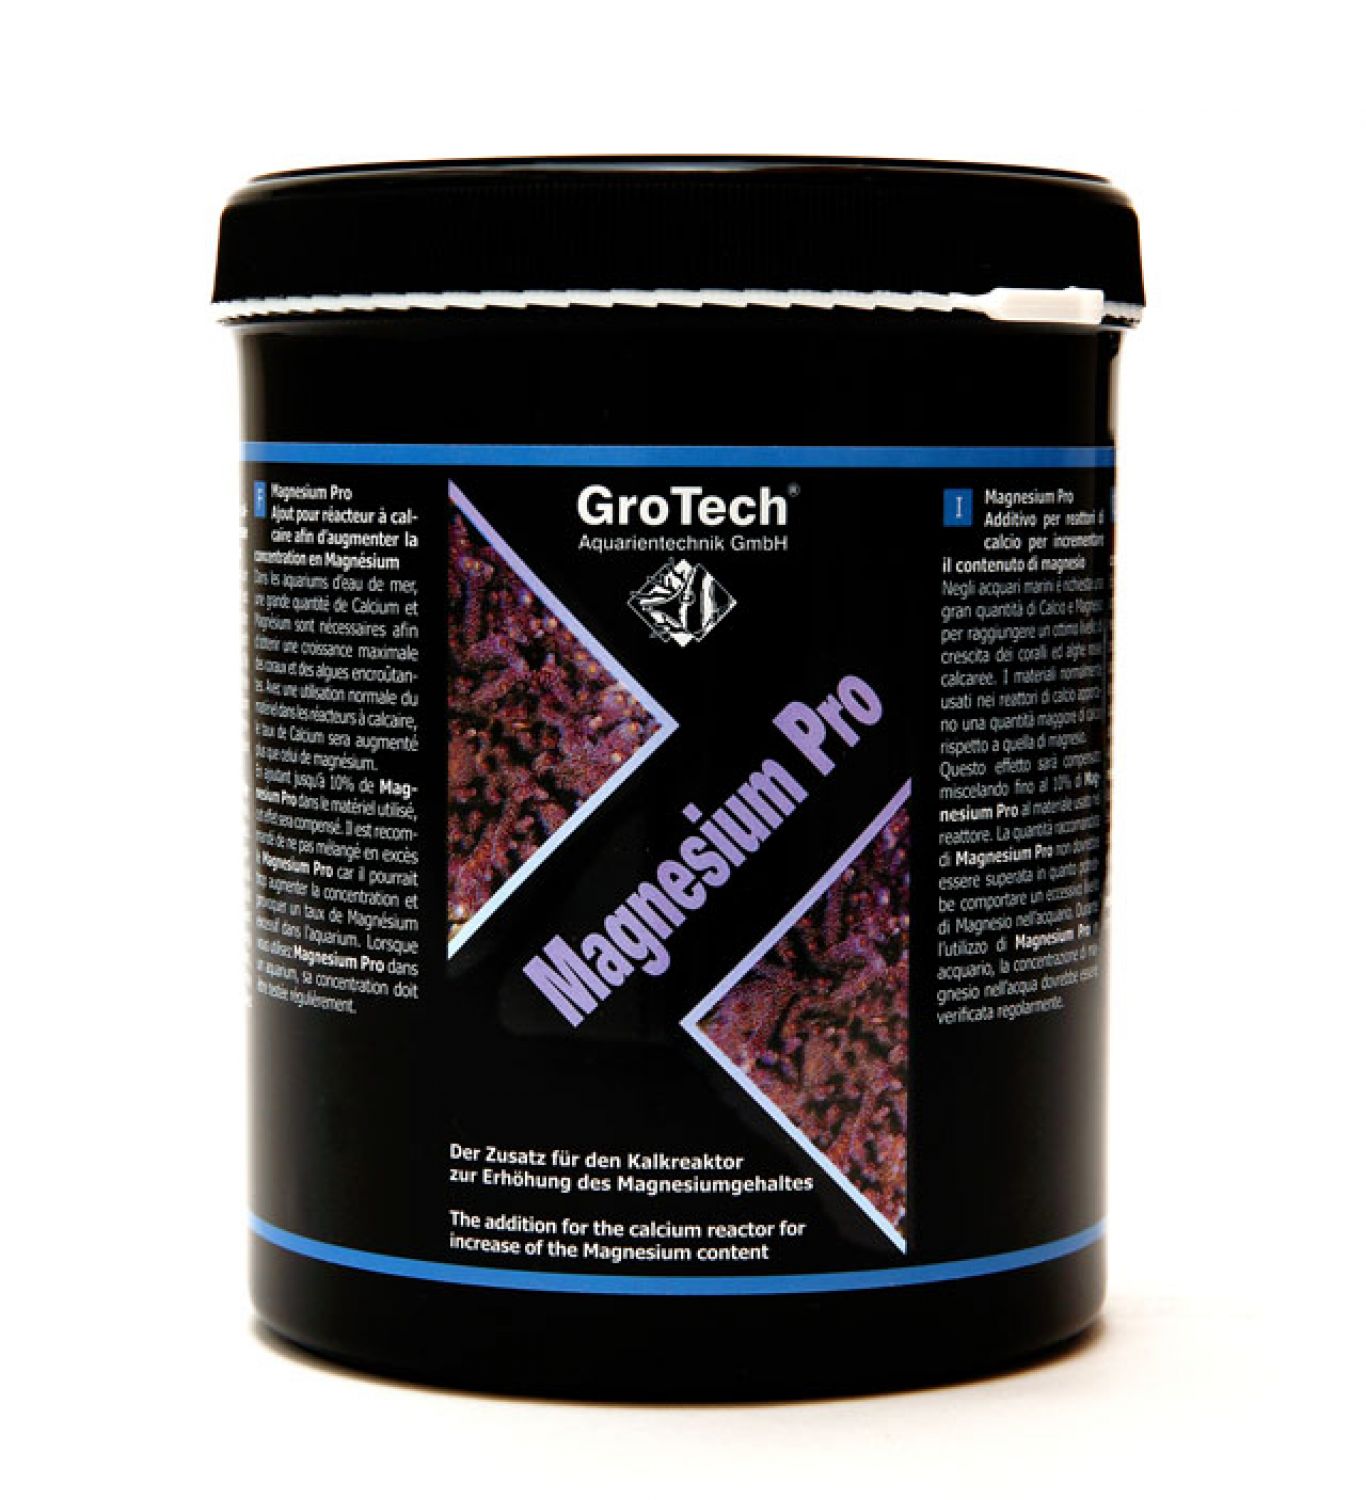 GroTech Magnesium pro - 1000 g-Dose